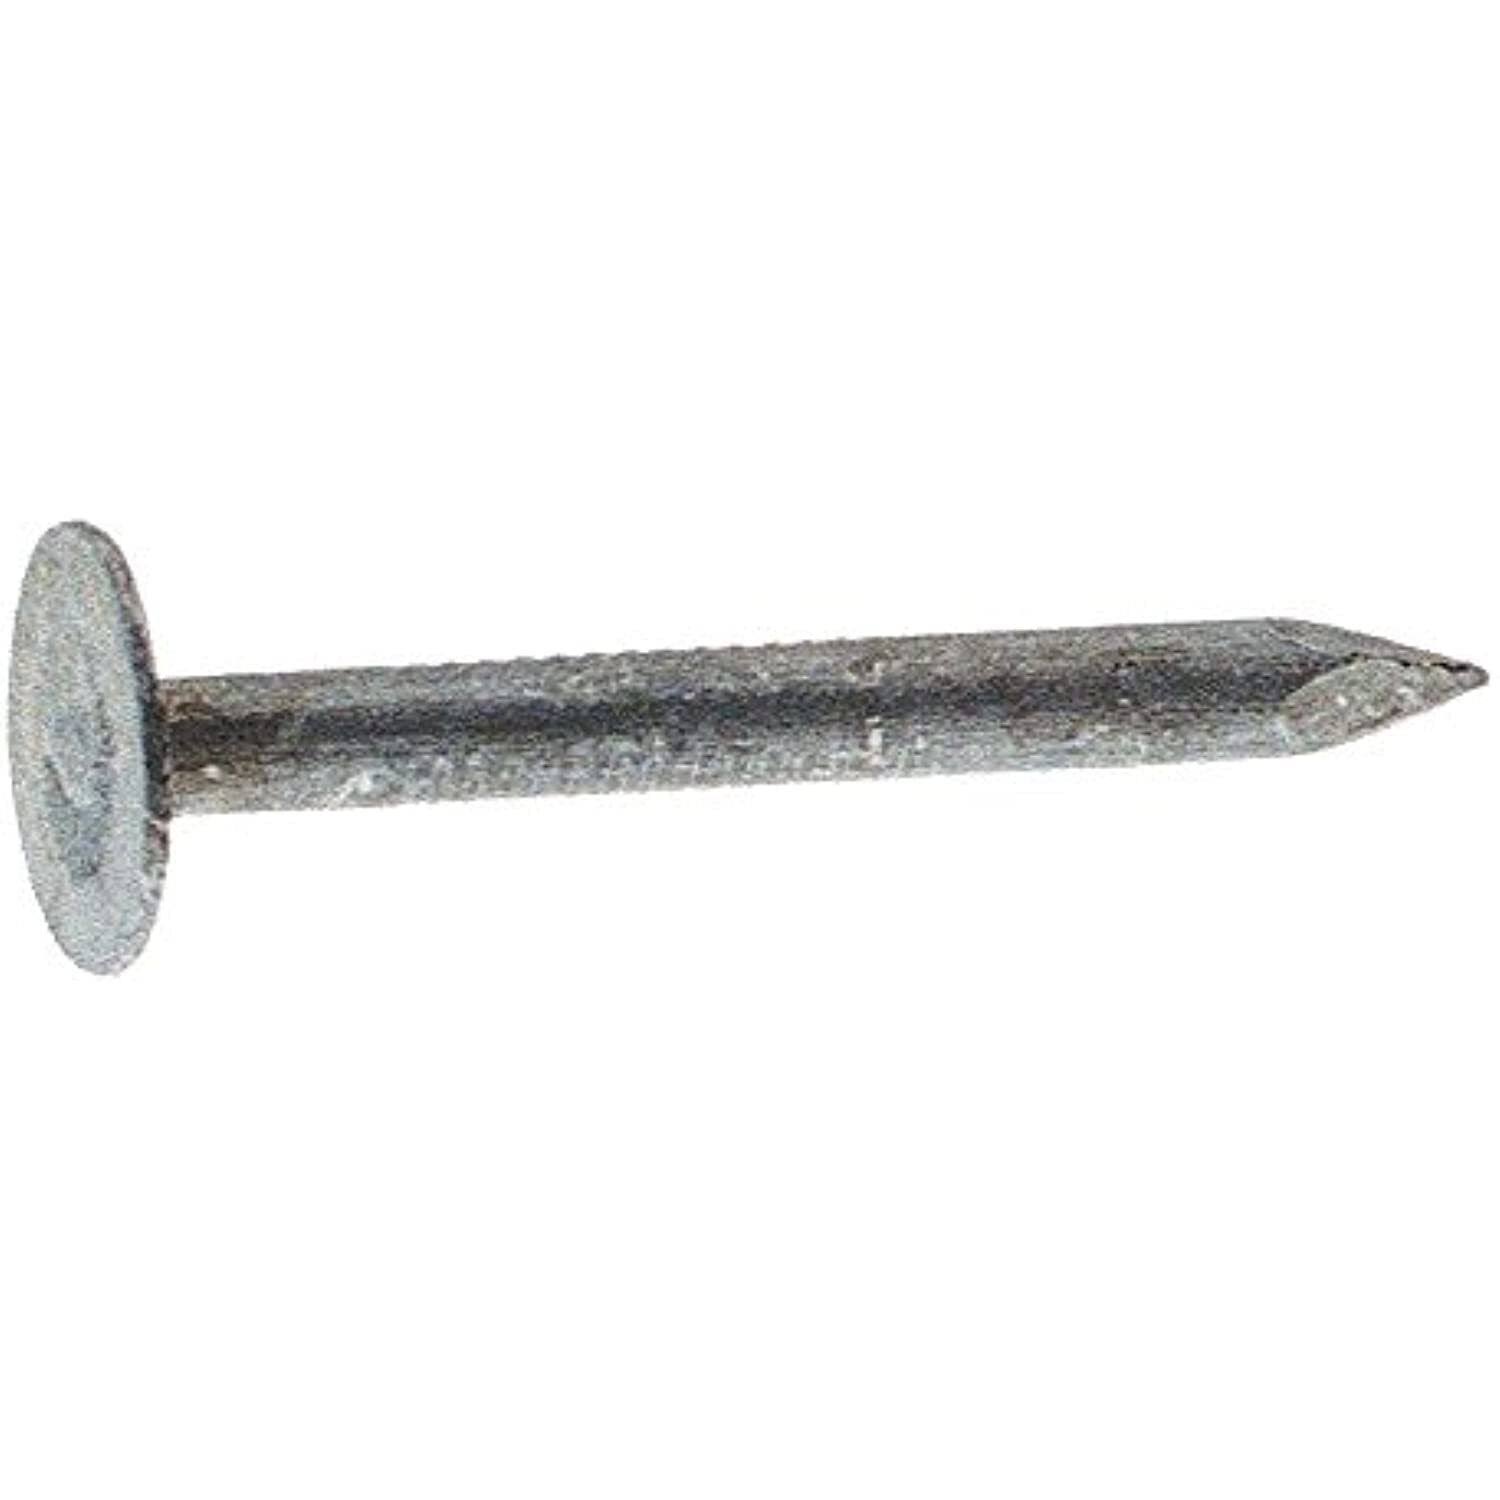 Hillman Fasteners 11-Gauge Galvanized Roofing Nail - 1-1/4in, 1lb